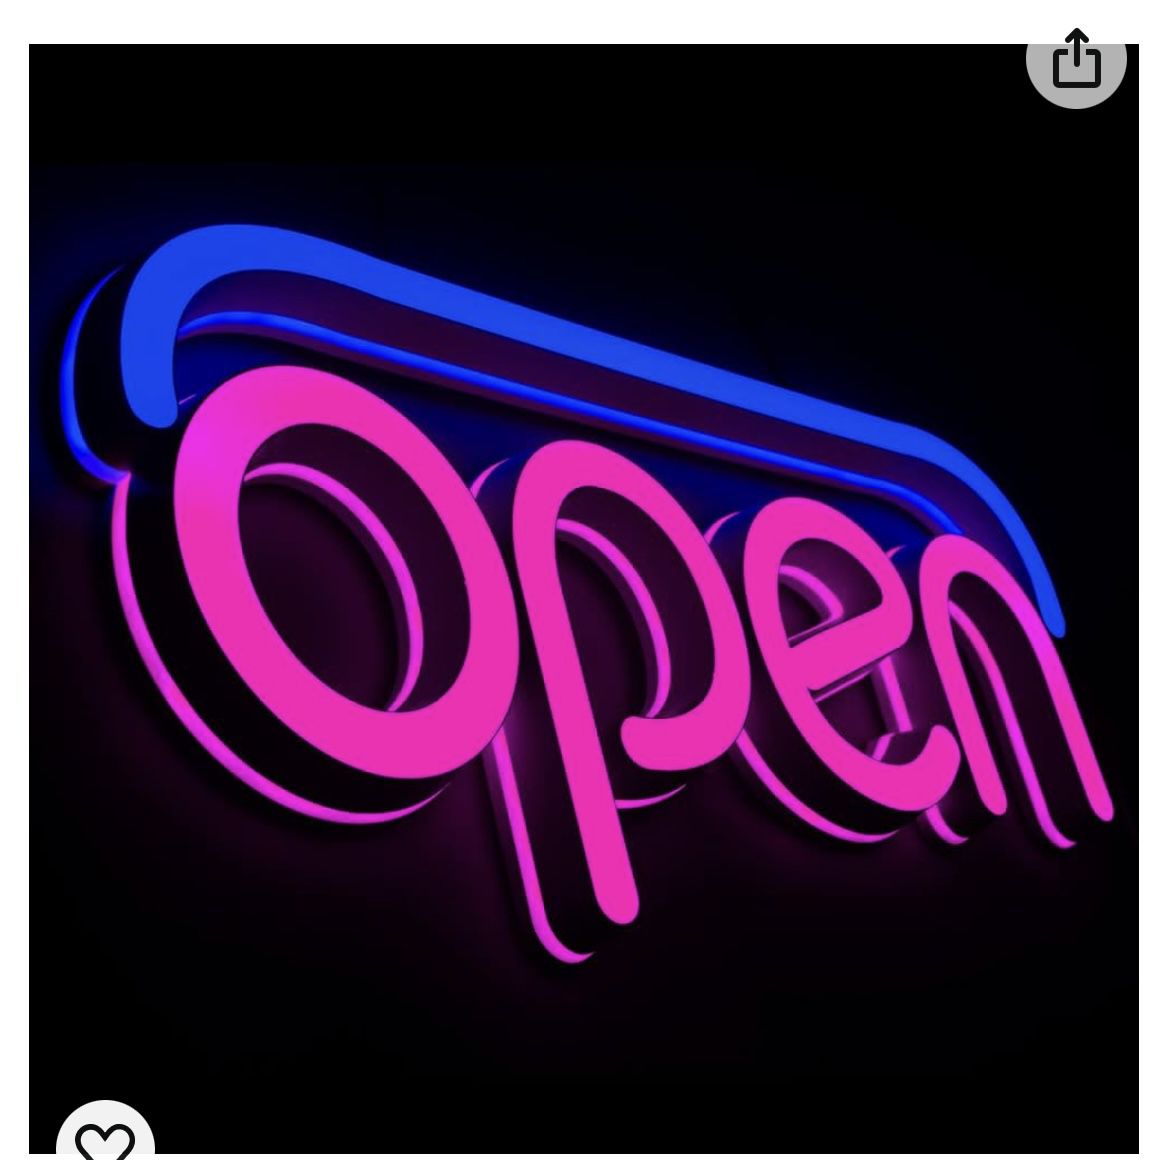 LED Open Signs for business, 19.7x9 Inch neon open sign, Static Display or Flashing Mode, Ideal for Restaurant, Bar, Salon and More, Remote Control, w